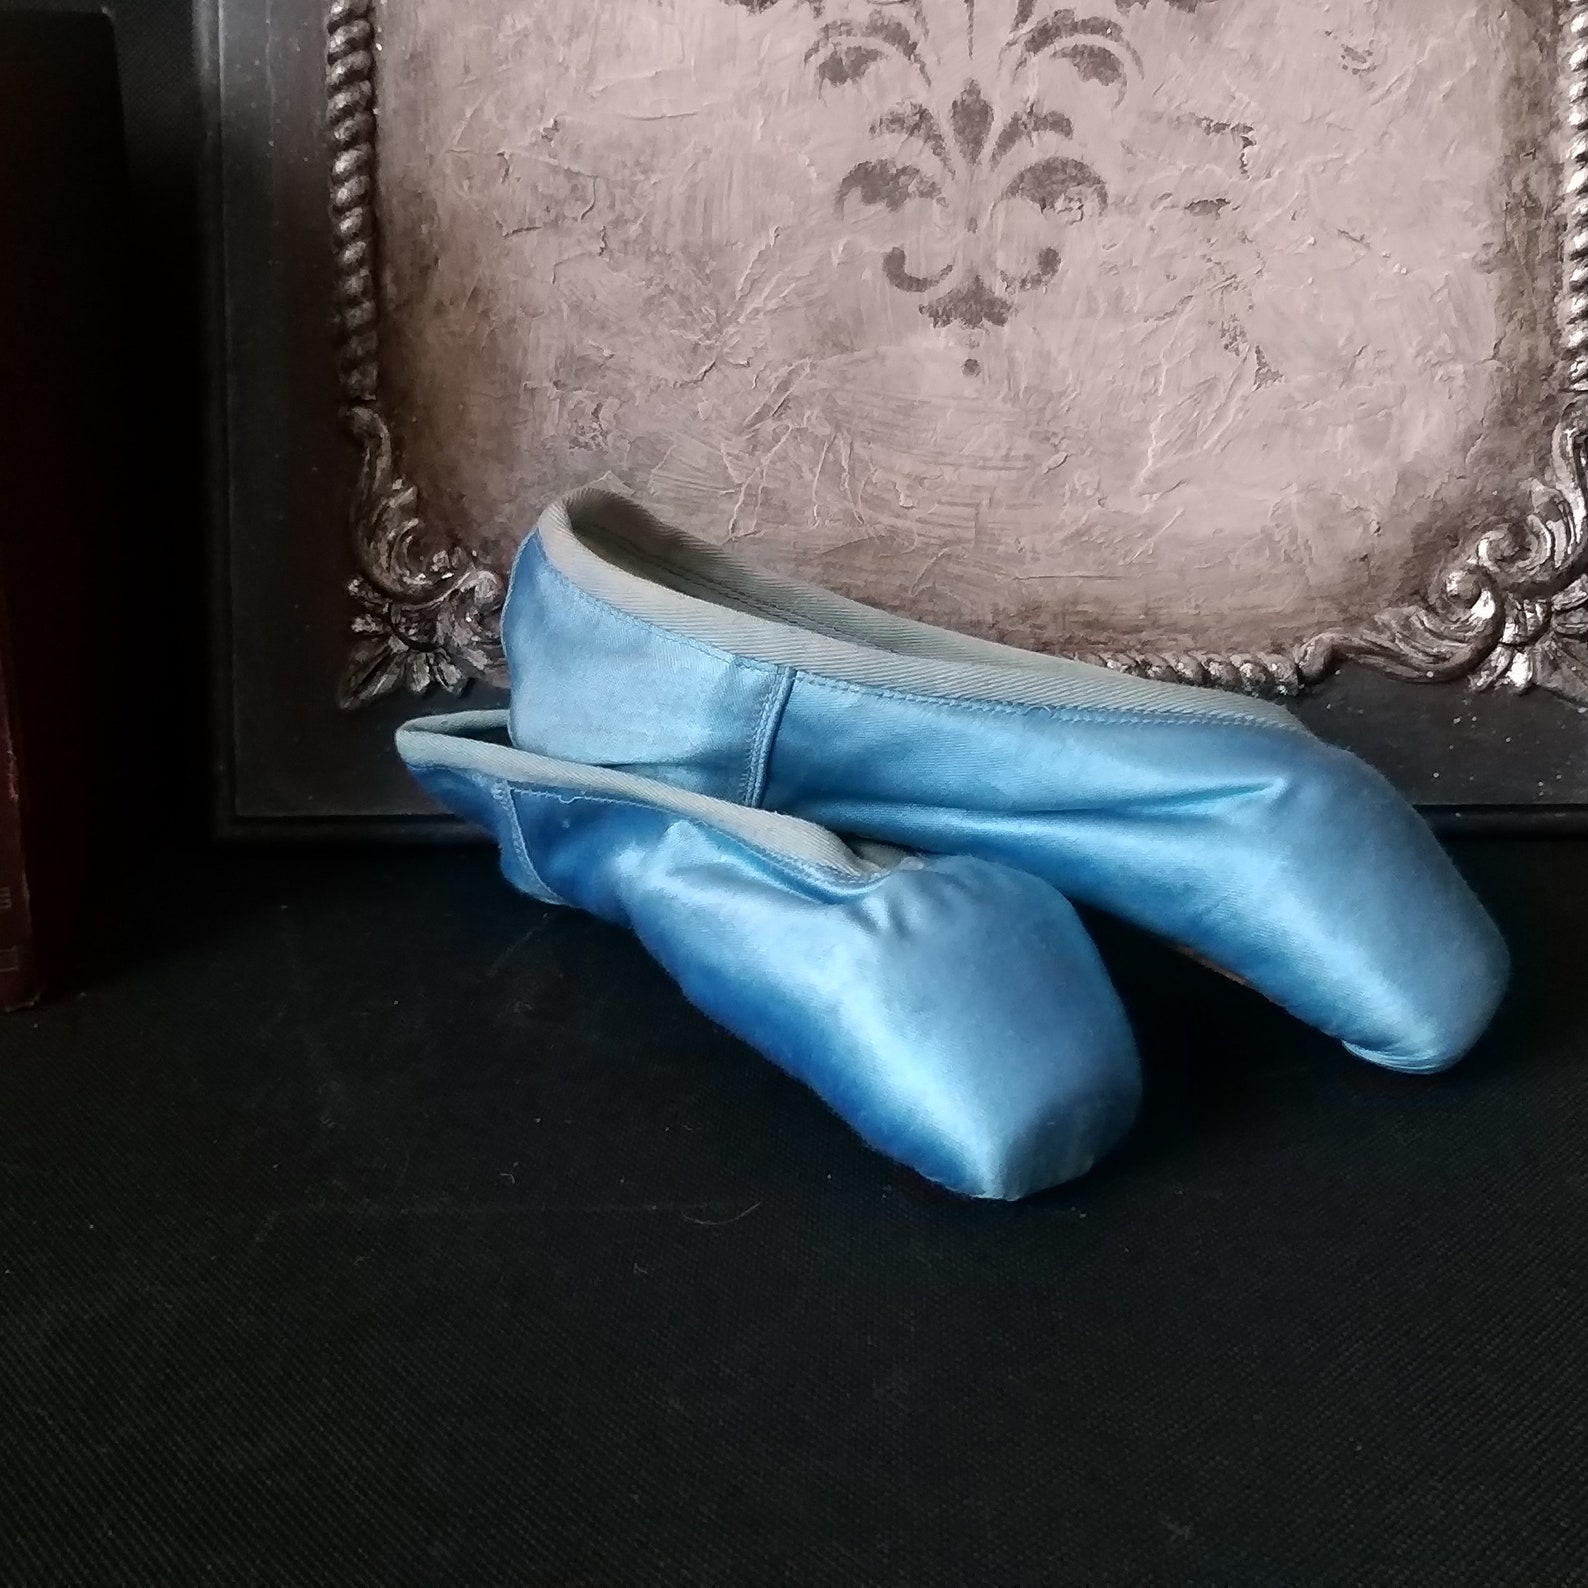 blue satin ballet pointe shoes vintage pair of pointe shoes slippers little girls shabby ballet shoes french romantic décor vint